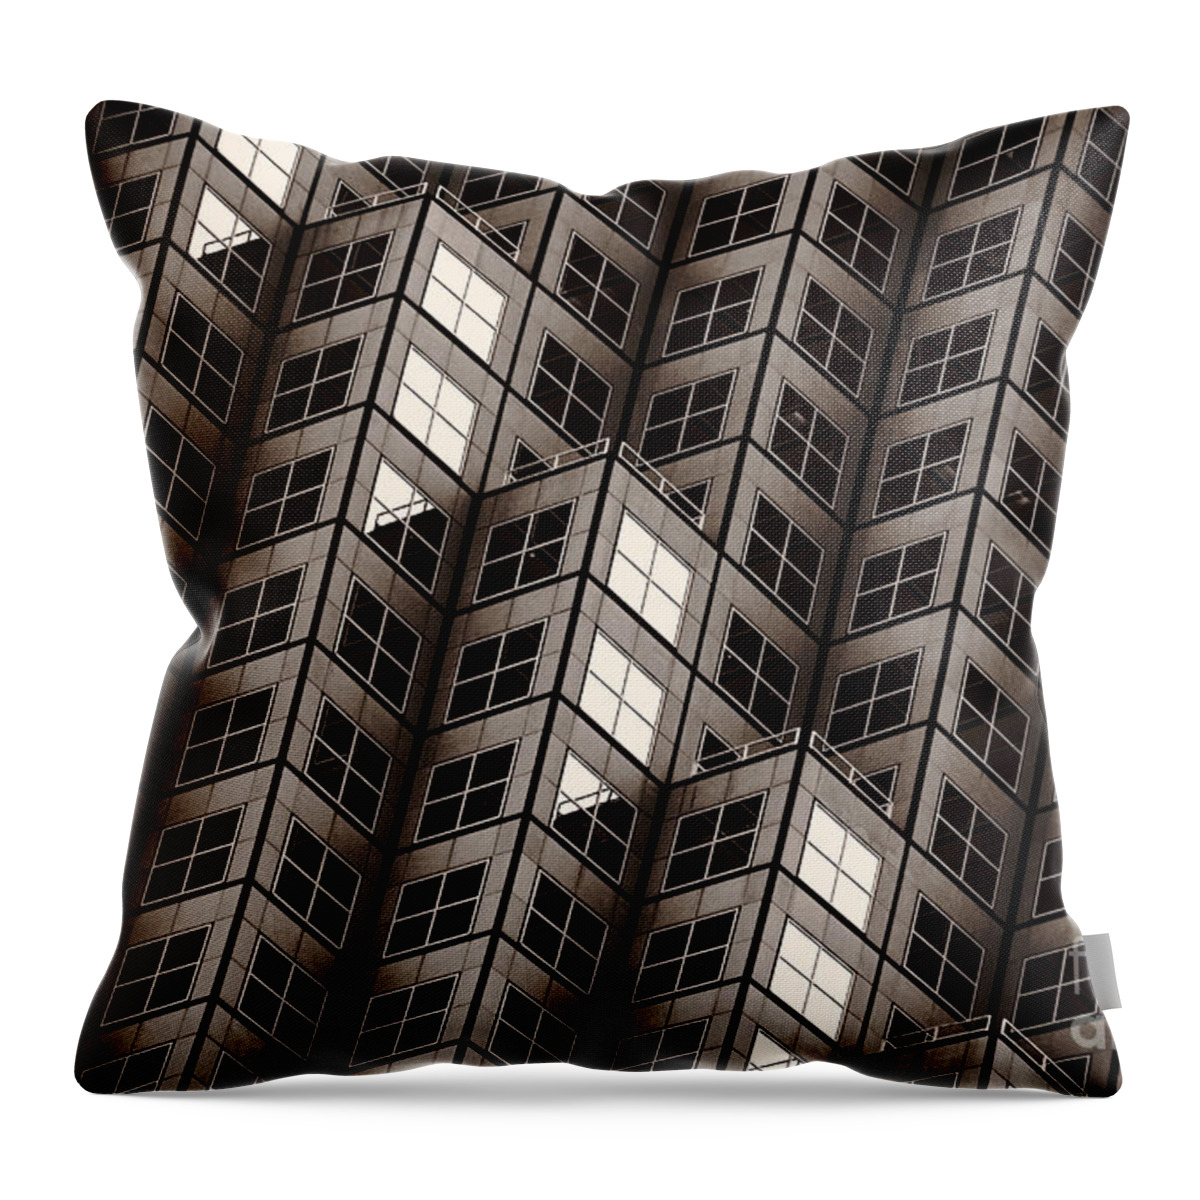 Building Throw Pillow featuring the photograph Dices Noir by Lorenzo Cassina